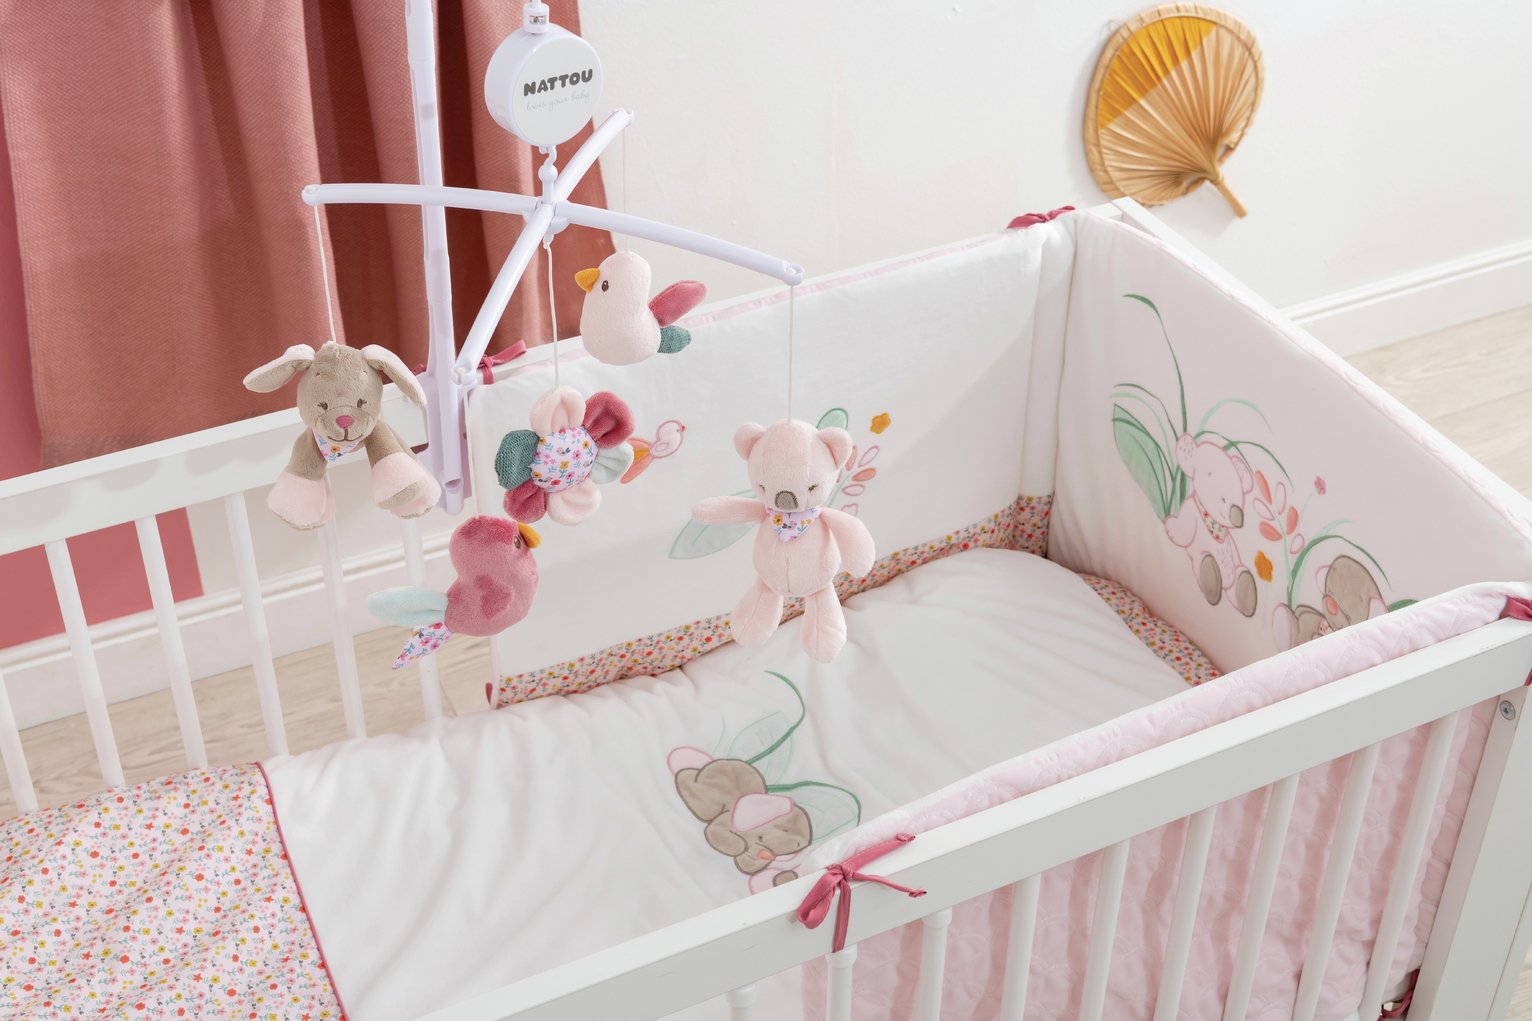 Nattou Iris and Lali Cot Mobile Review